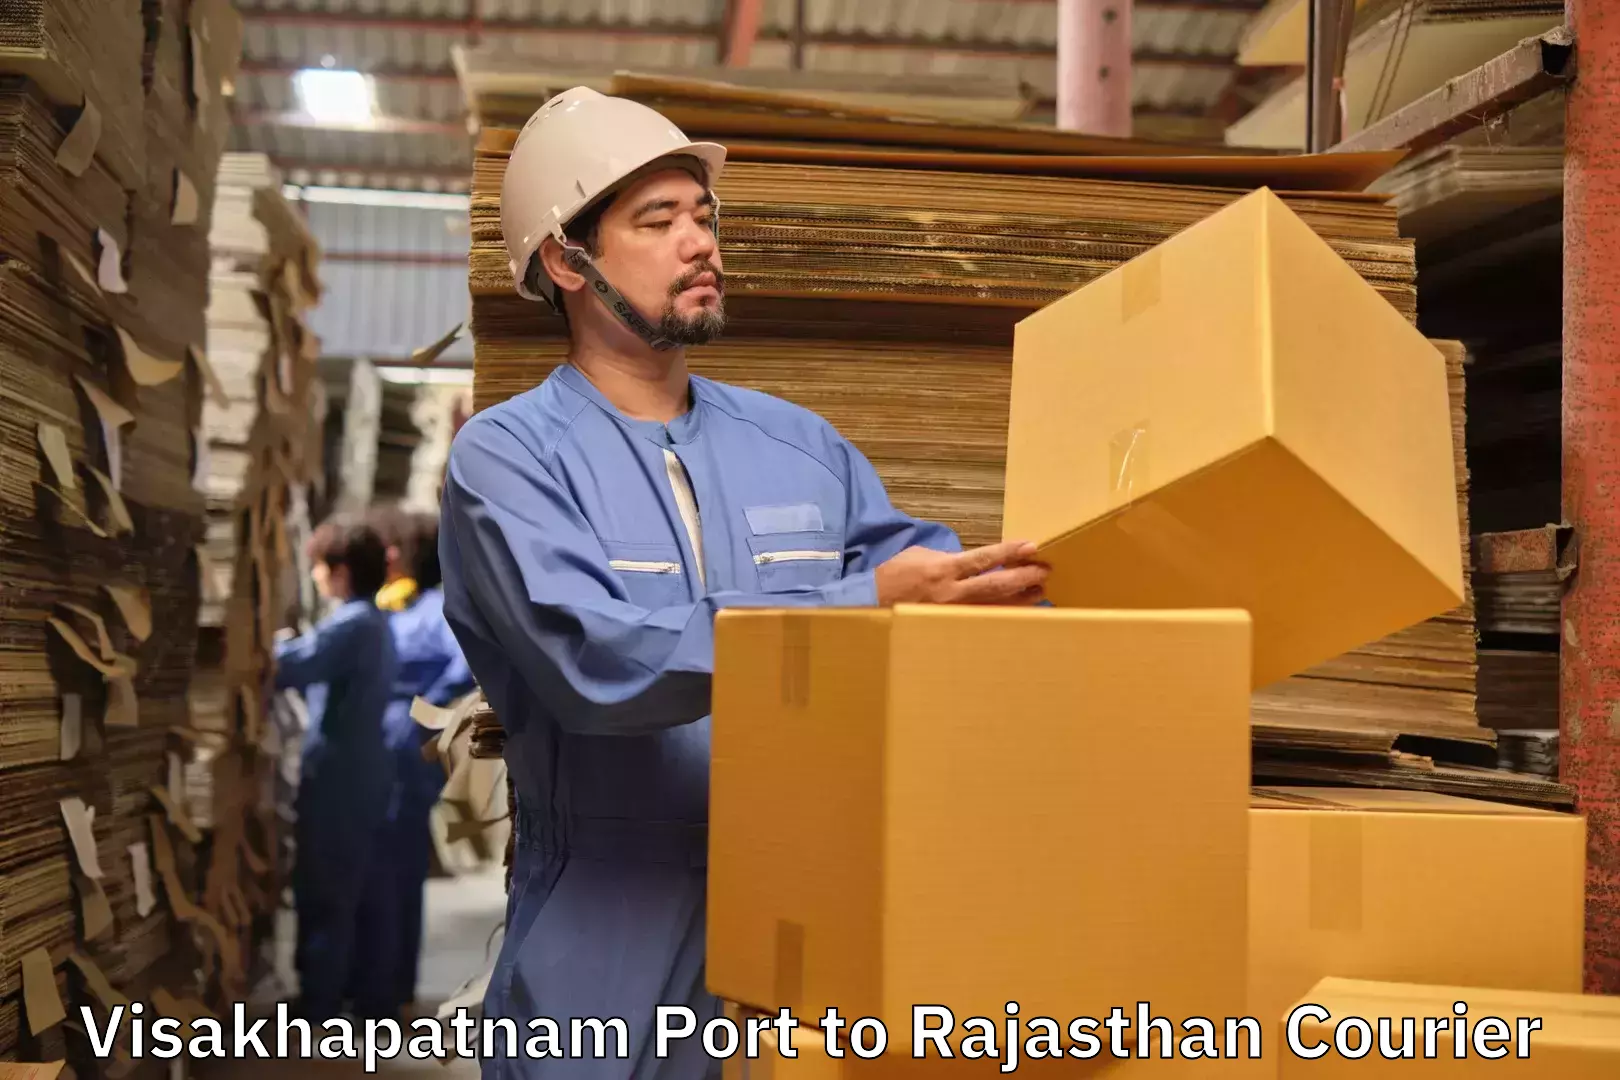 Luggage delivery providers Visakhapatnam Port to Bhopalgarh